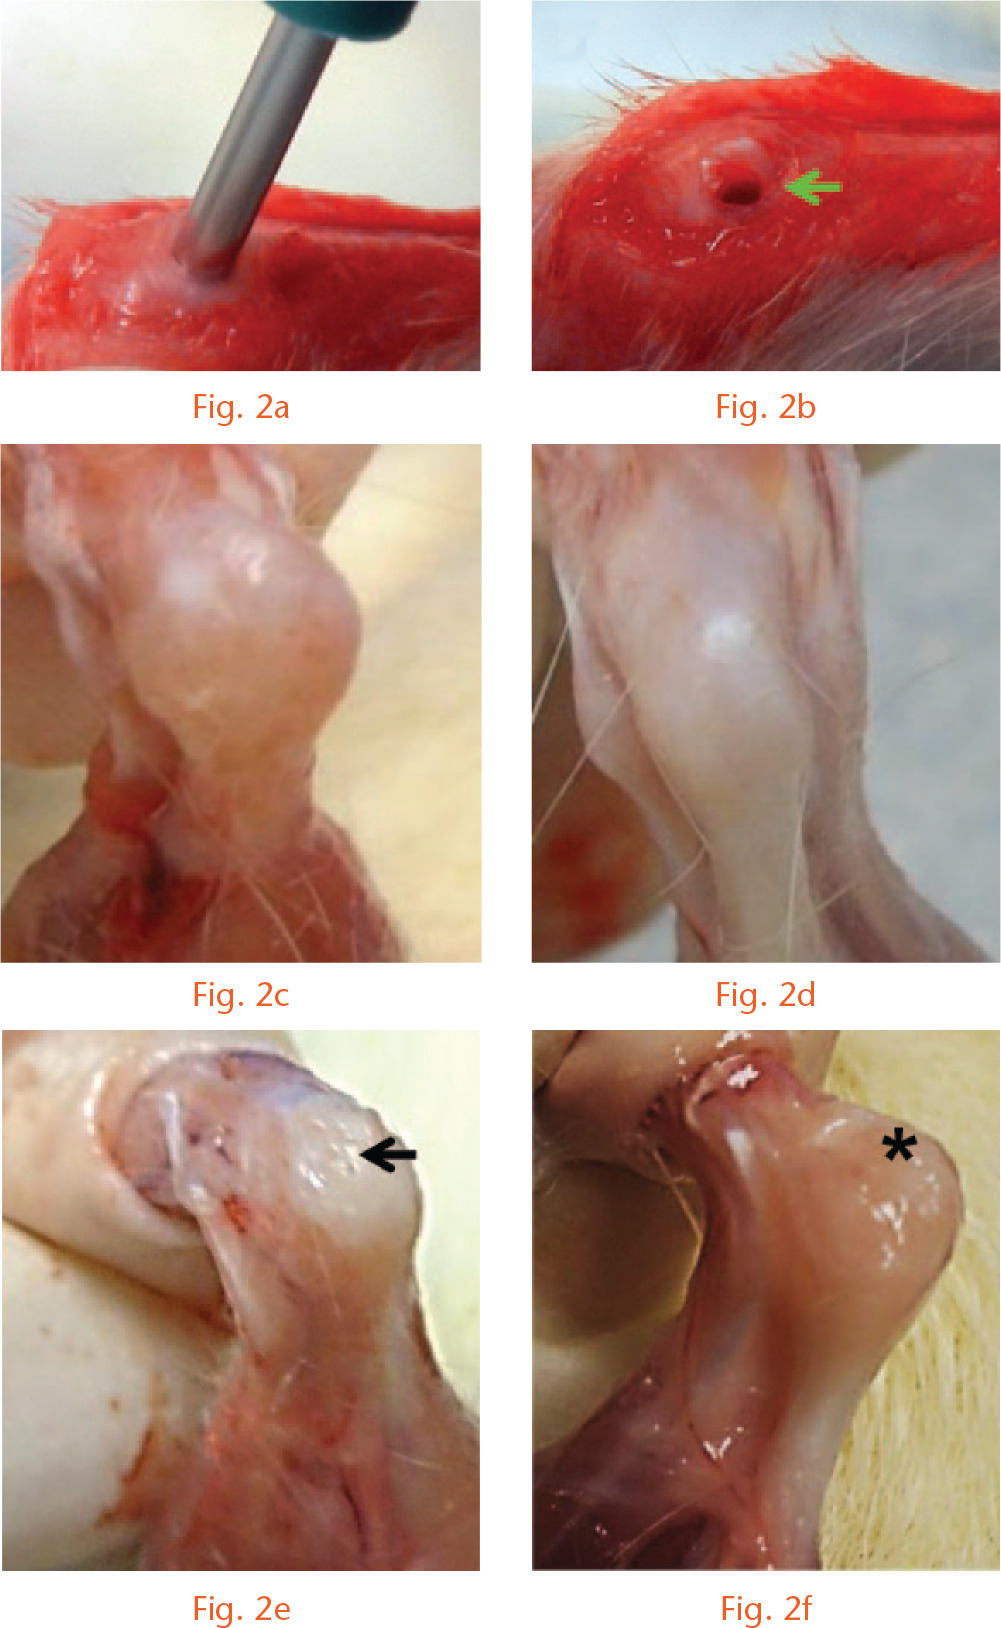  
            Images showing the gross examination of the effect of kartogenin platelet-rich plasma (KGN-PRP) on the healing of wounded rat Achilles tendon entheses (ATEs). a) A 1 mm diameter wound was made in the rat ATE (3 mm total width) using a biopsy punch. b) Wound in the rat ATE. c) Wounded rat ATE 3 months after KGN-PRP treatment. d) An intact rat ATE. e) Wounded rat ATE after PRP treatment shows a wound healing site with uneven surface (arrow). f) Wounded rat ATE after saline treatment also shows incomplete healing with a rough surface and smaller healed region and reddish immature tissues (*).
          